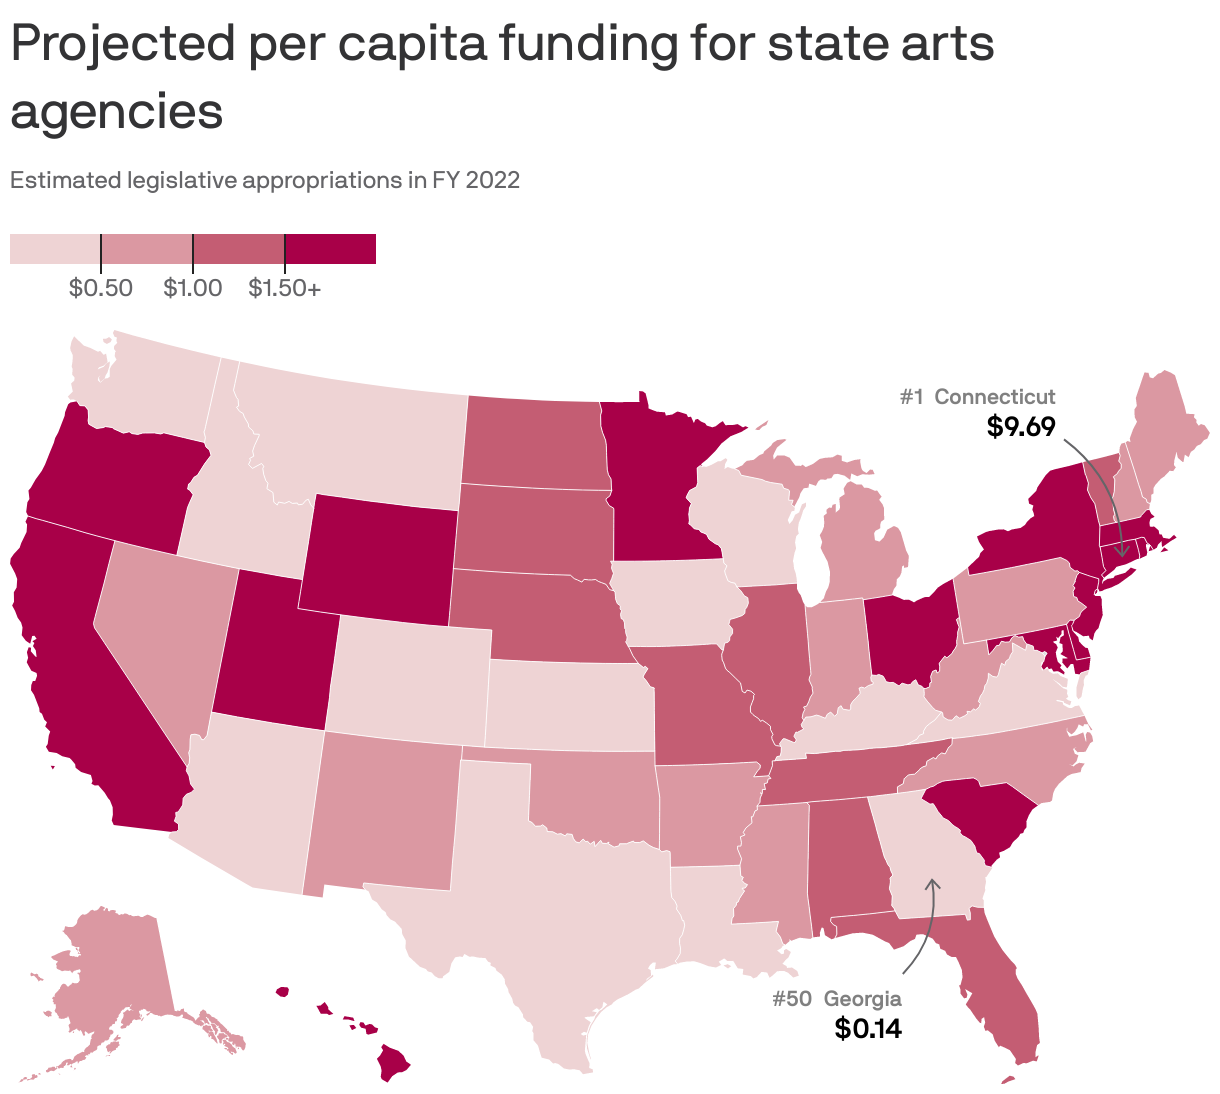 Projected per capita funding for state arts agencies